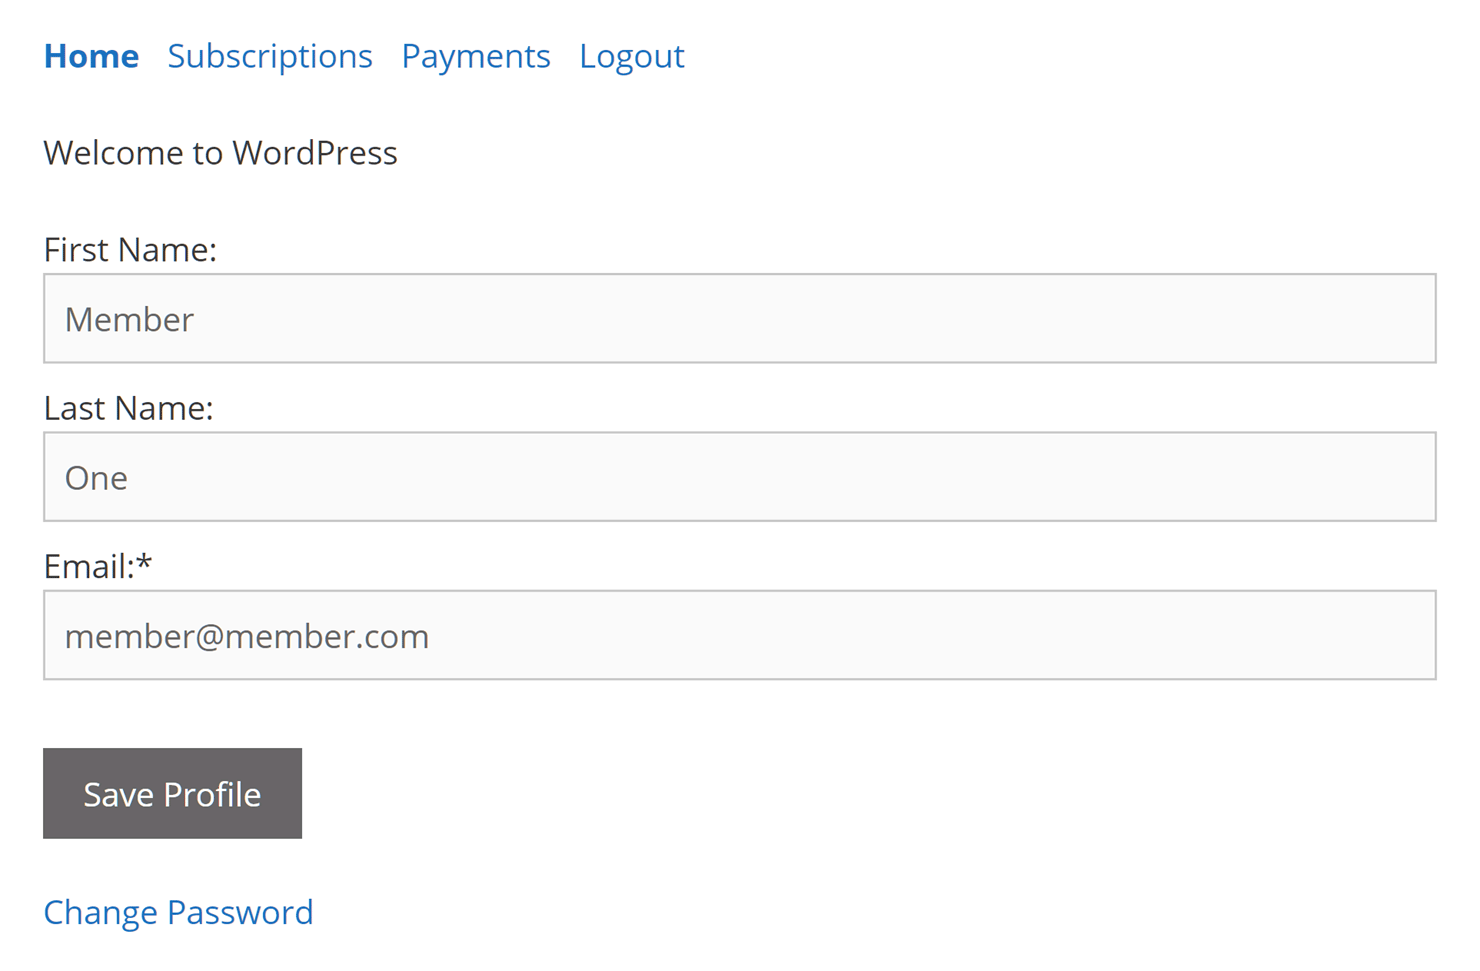 Account Form Published